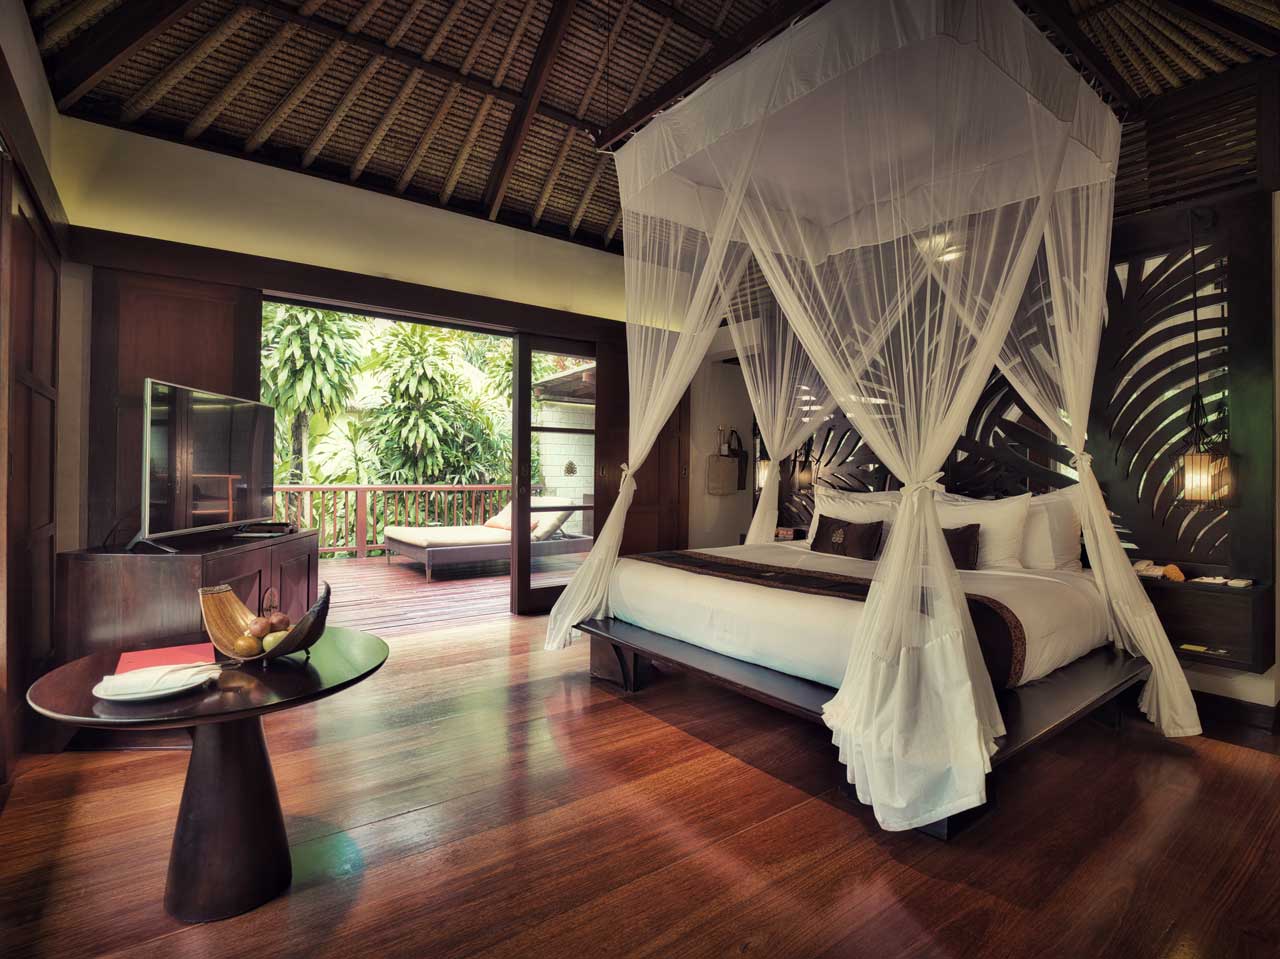 Special Offer - Bali Tropical Package